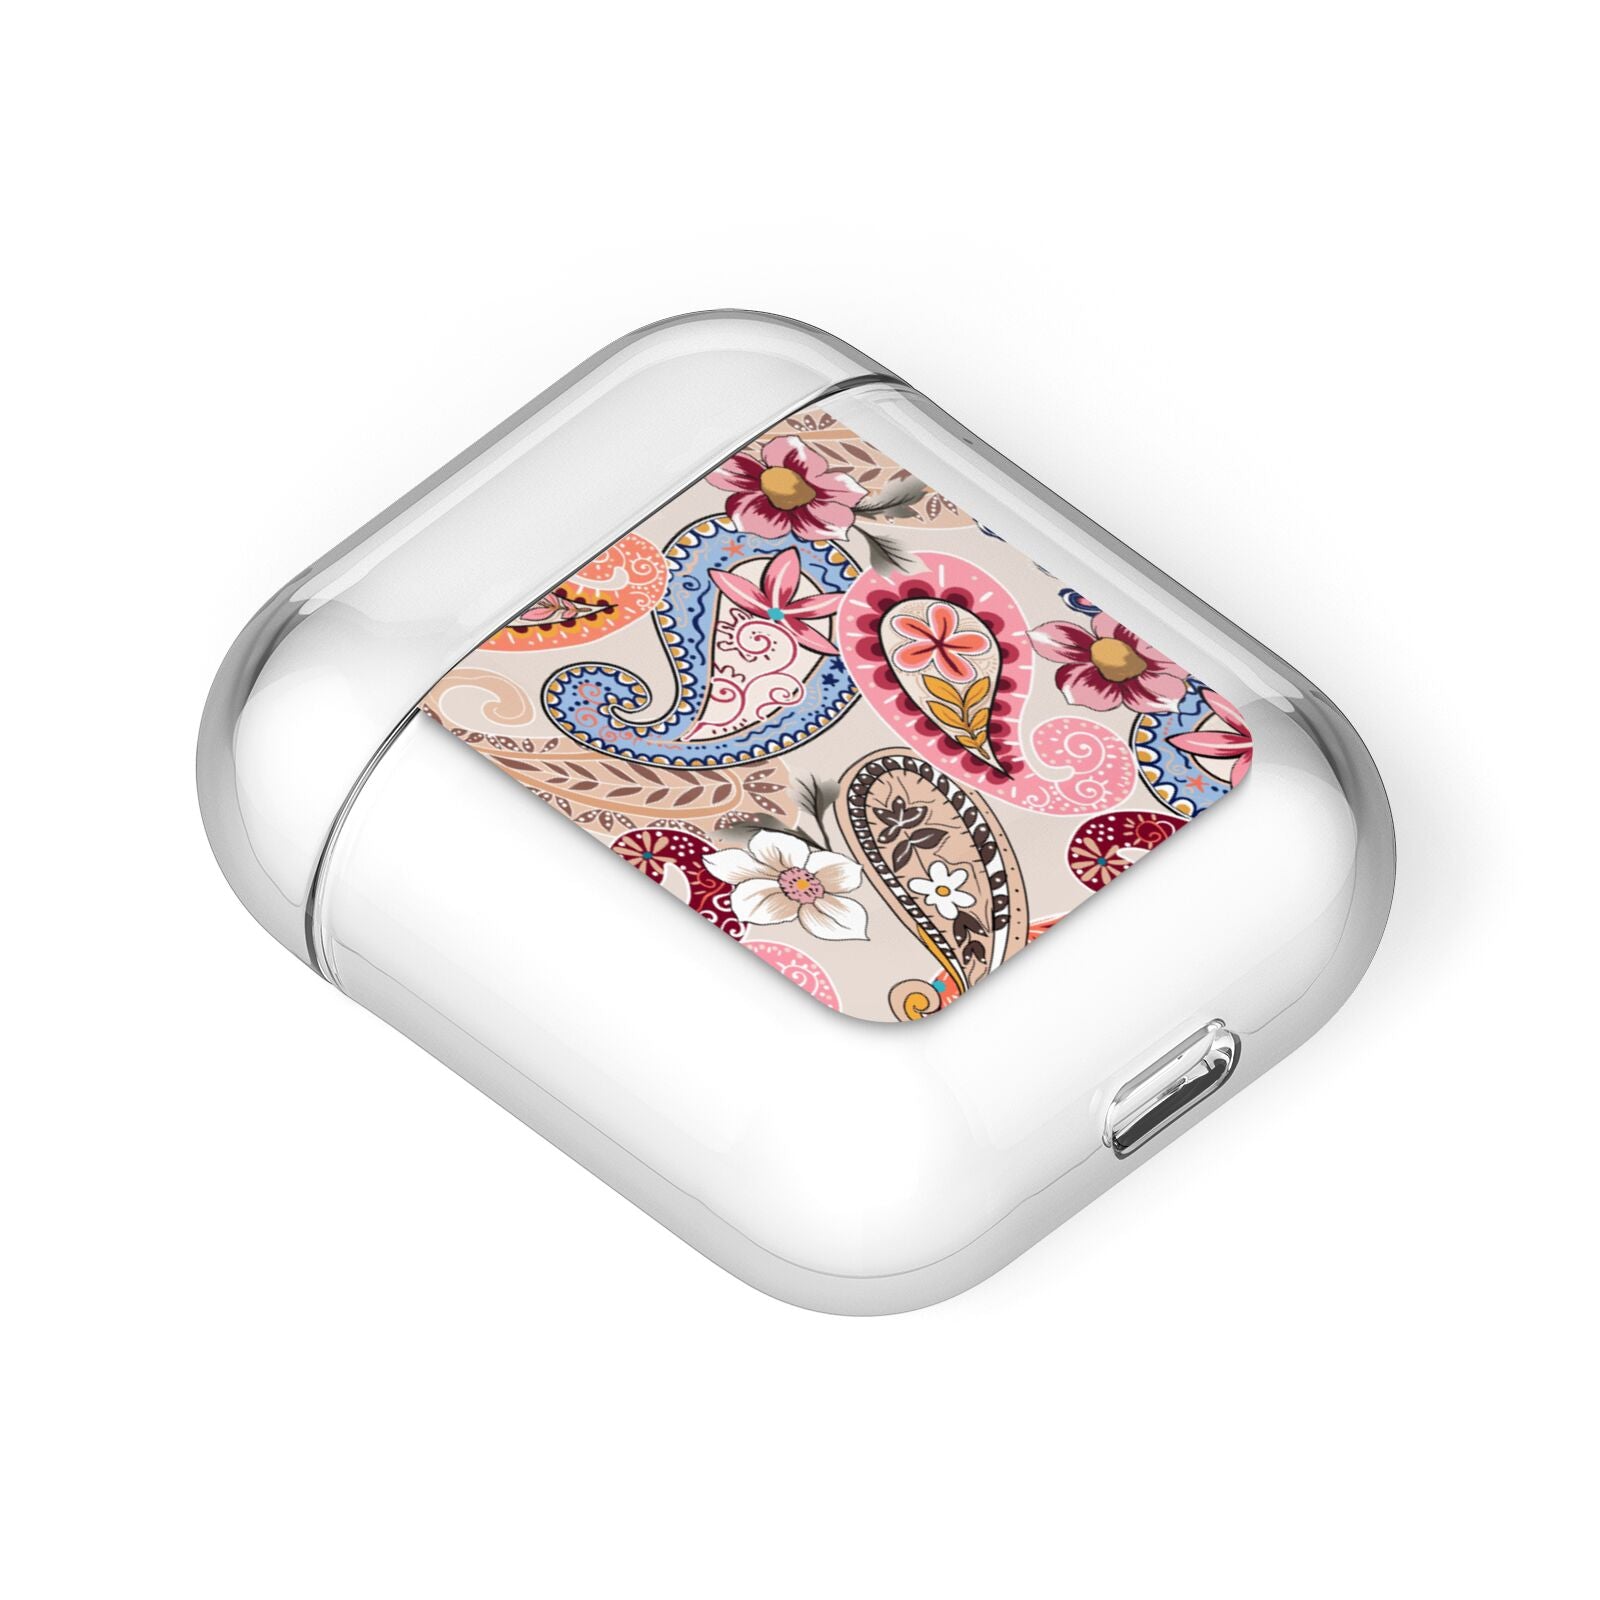 Paisley Cashmere Flowers AirPods Case Laid Flat